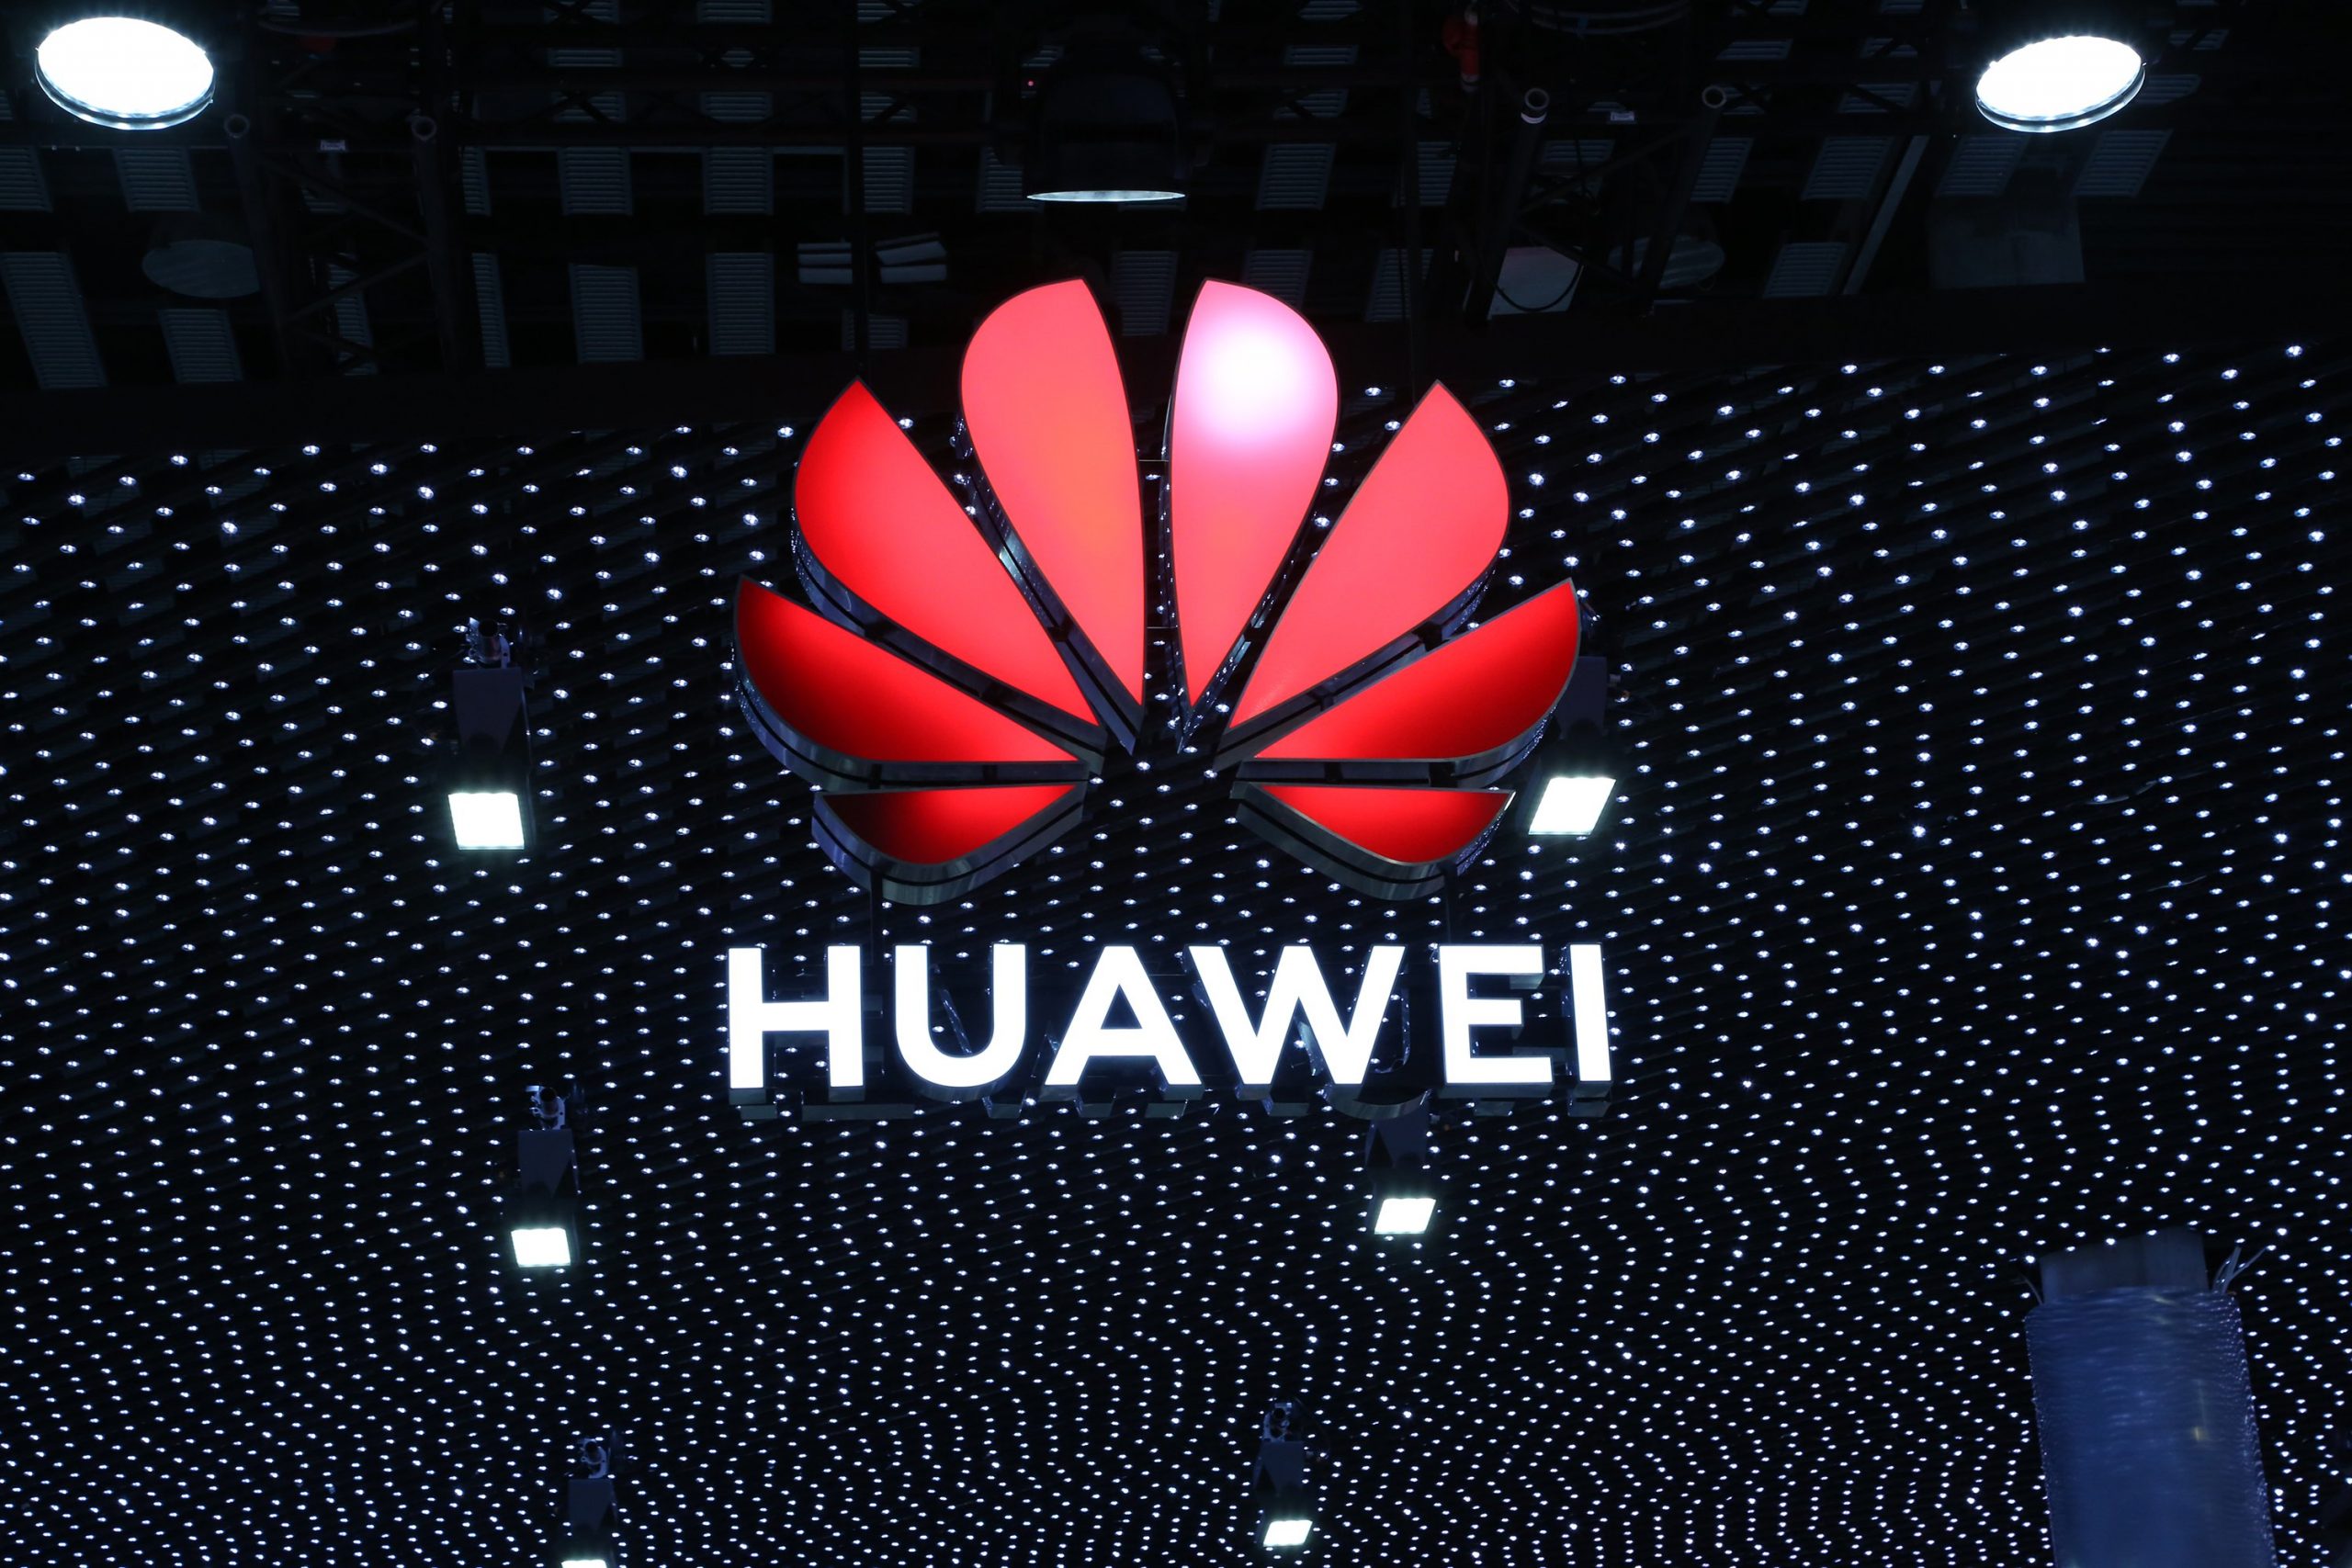 Huawei rivals seek to steal market share amid its troubles with the US